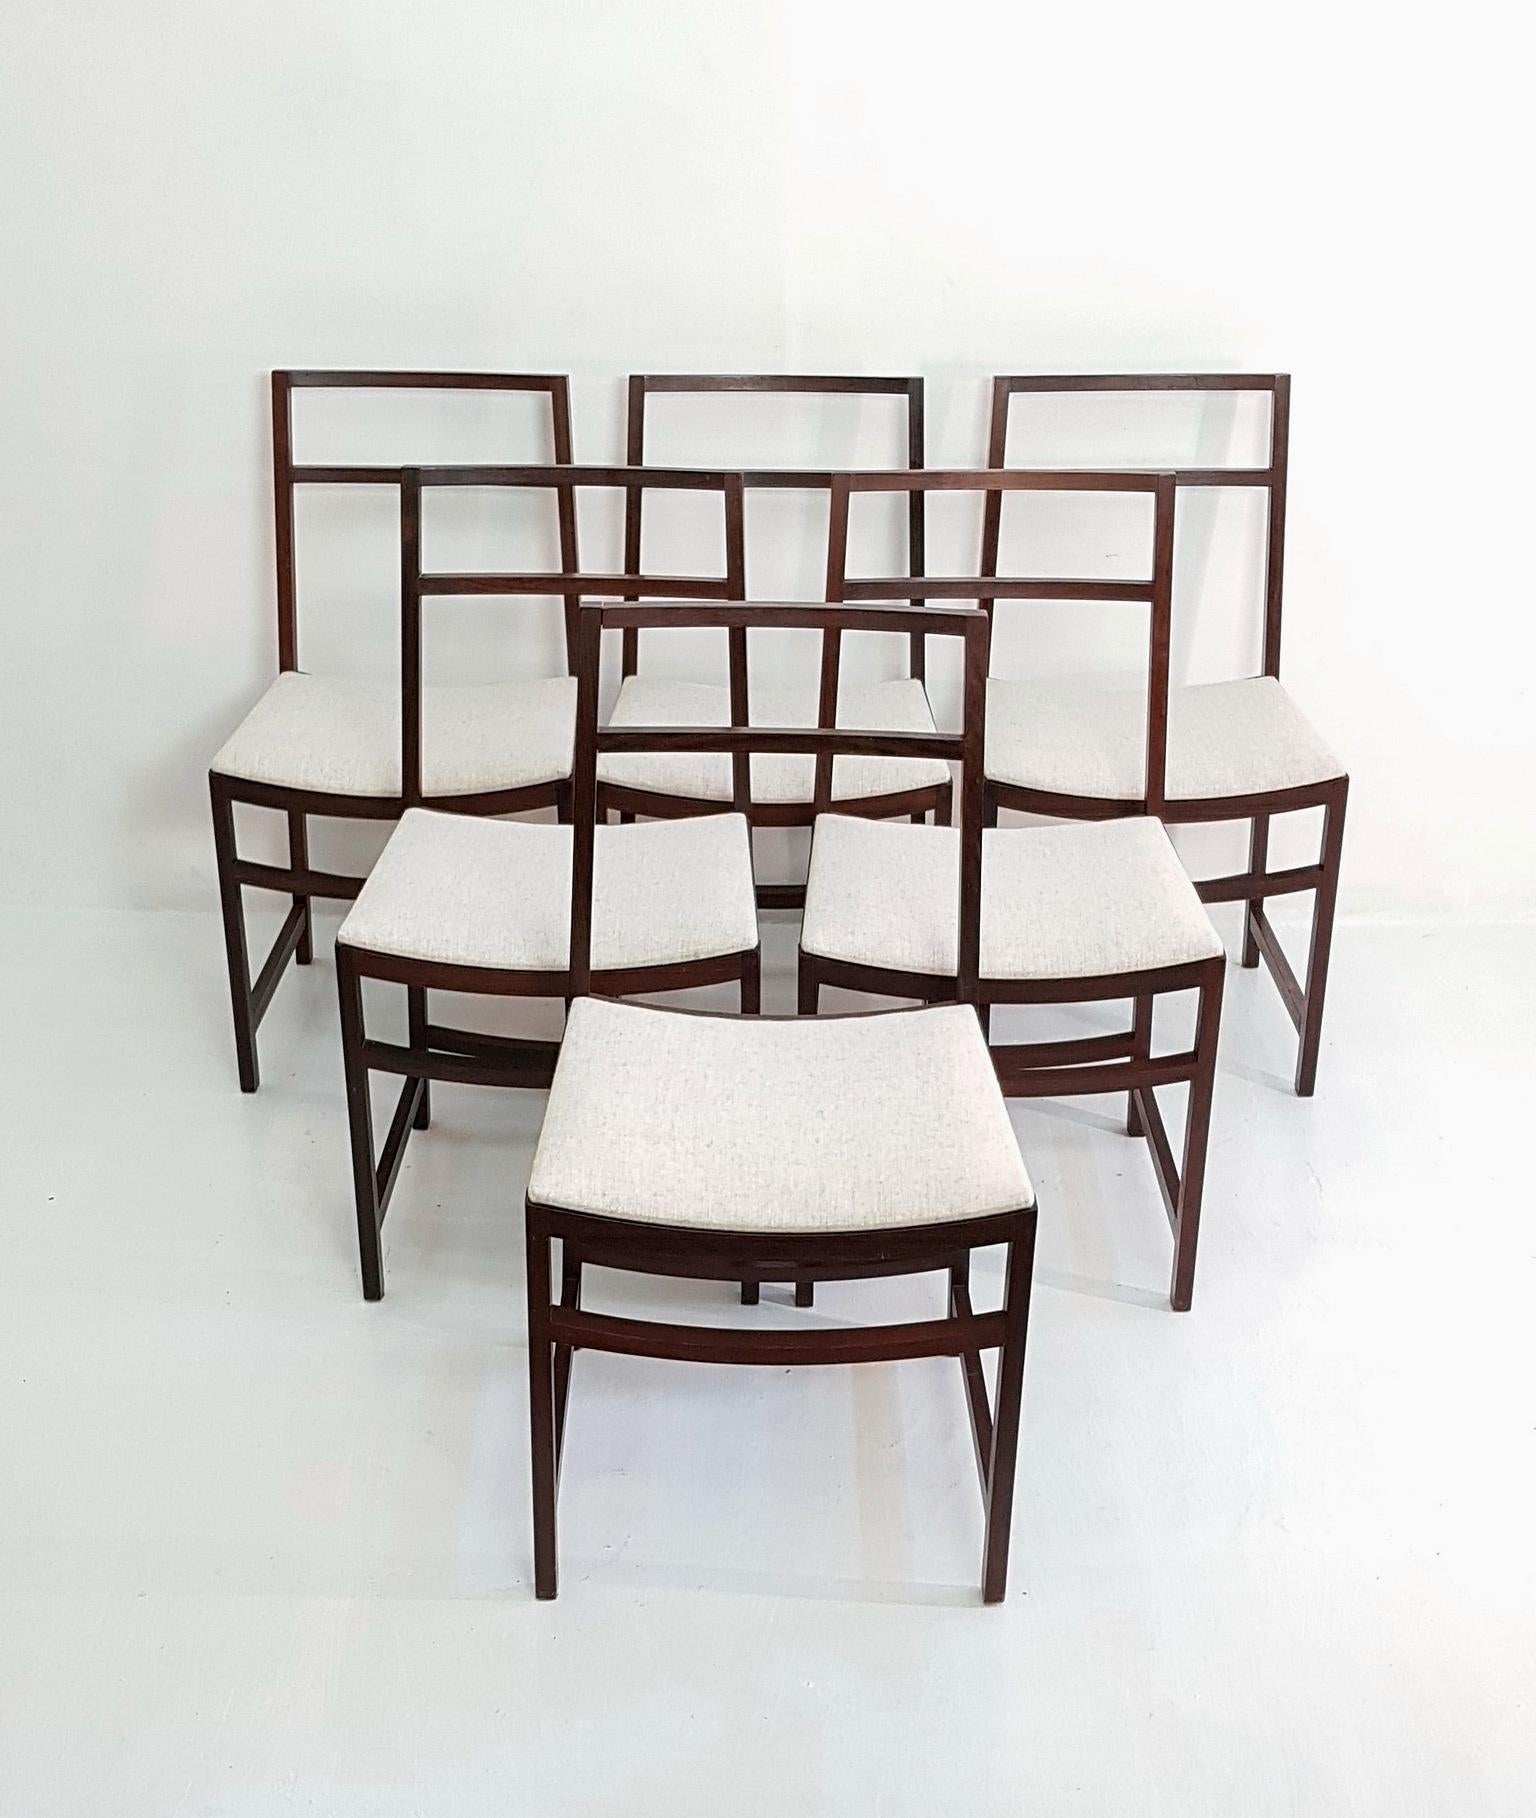 Midcentury set of 6 lightweight and sturdy chairs designed by Renato Venturi for MIM (Mobili Italiani Moderni) with beautifully reupholstered seats in Italian salt and pepper virgin wool. Marked underneath each chair with the famous brand name MIM.